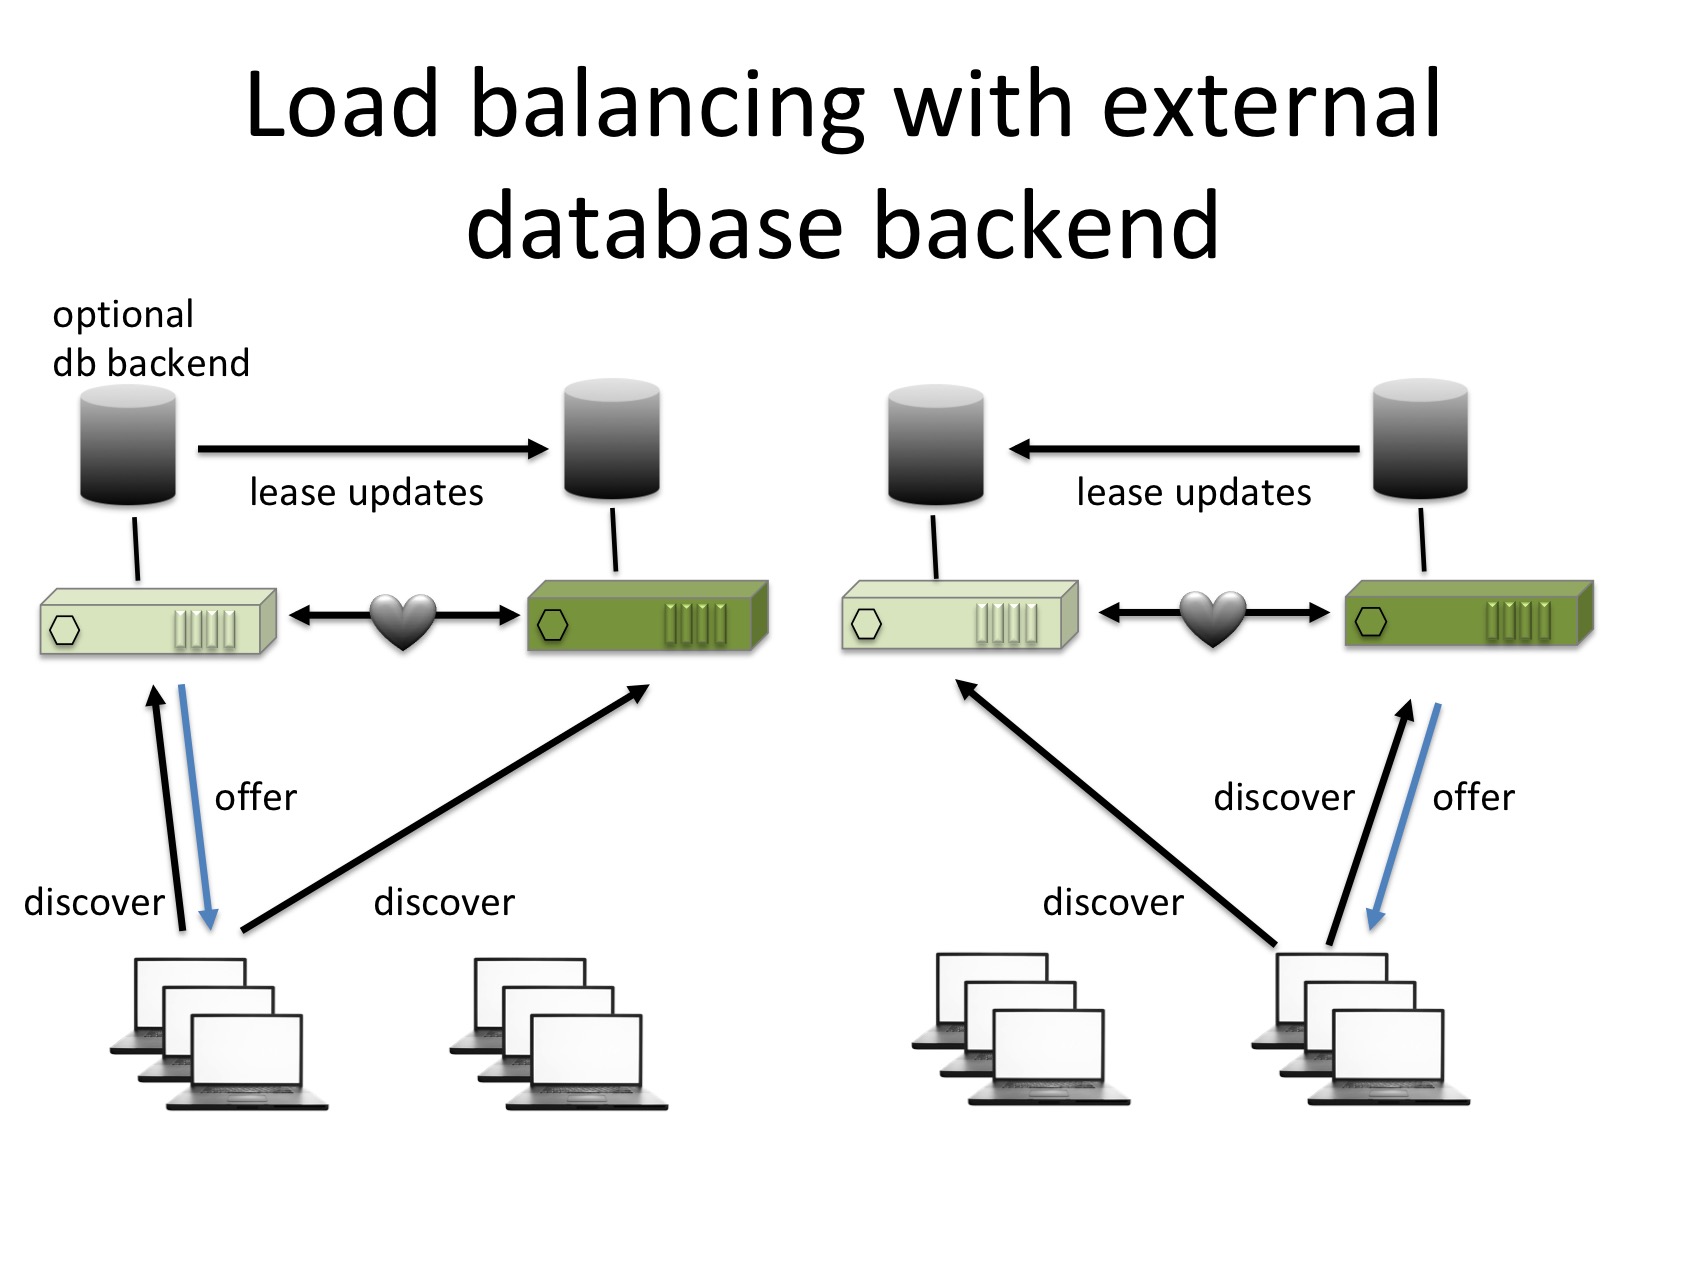 Diagram showing two Kea servers in a load-balancing configuration